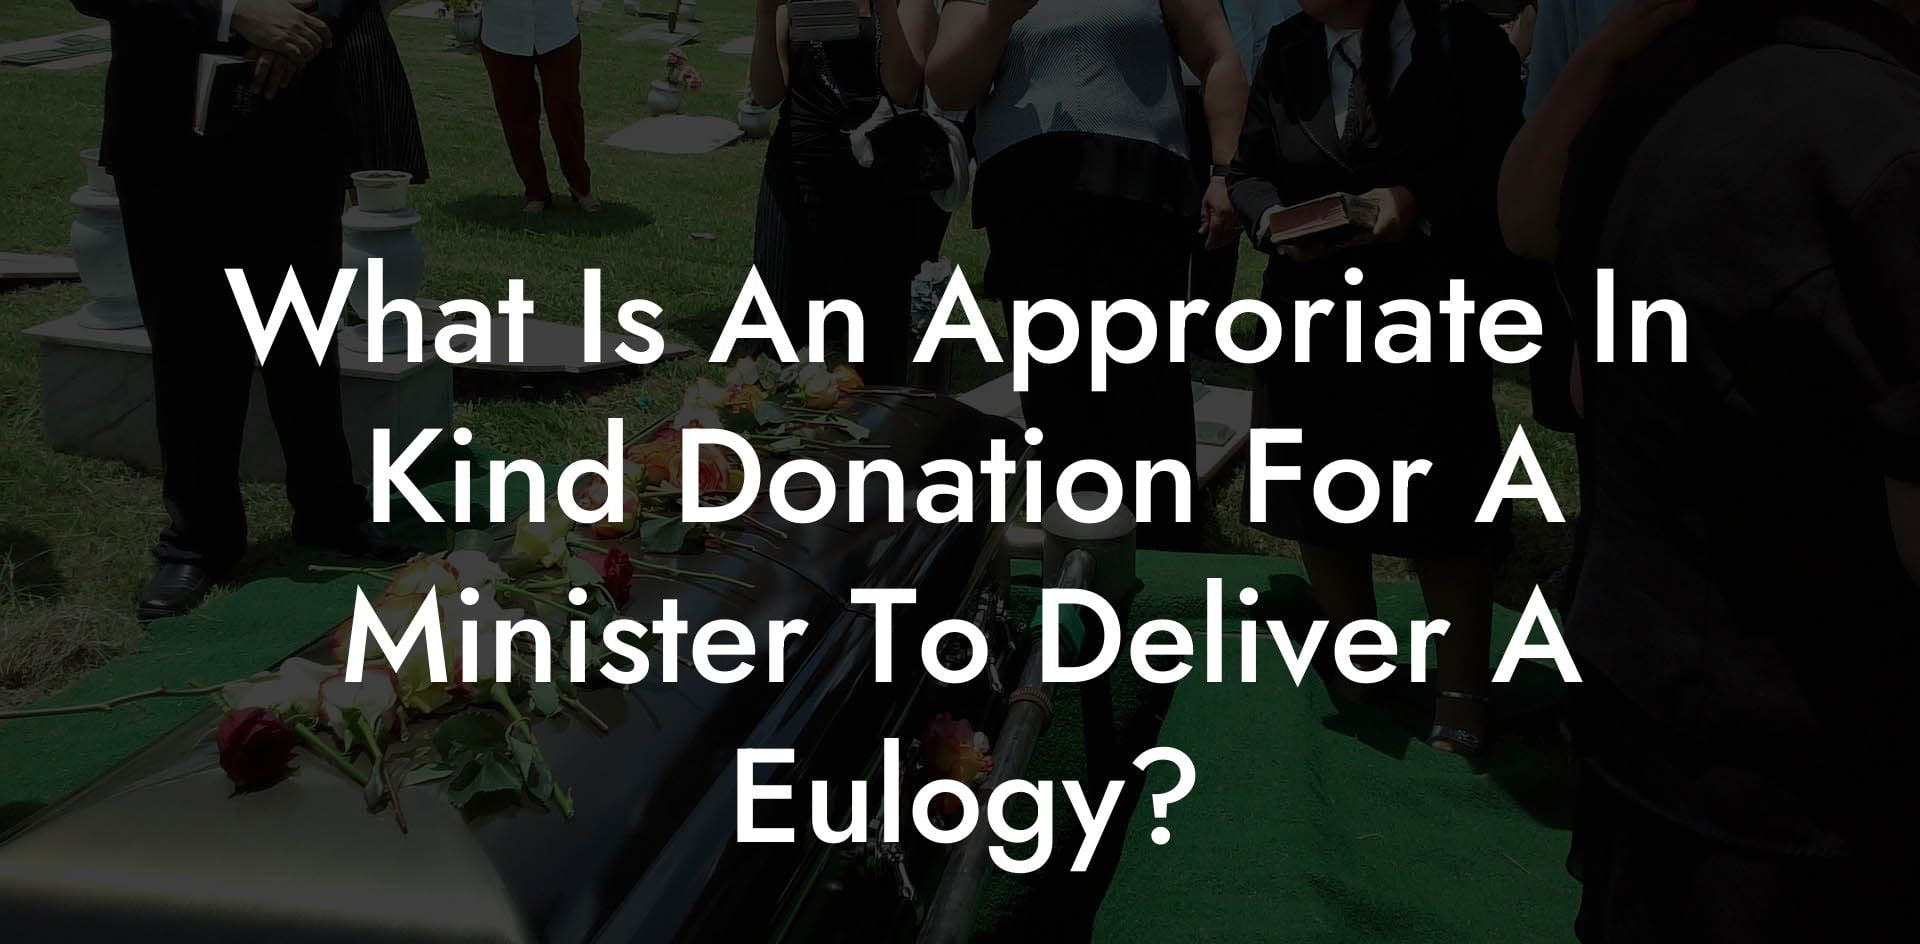 What Is An Approriate In Kind Donation For A Minister To Deliver A Eulogy?